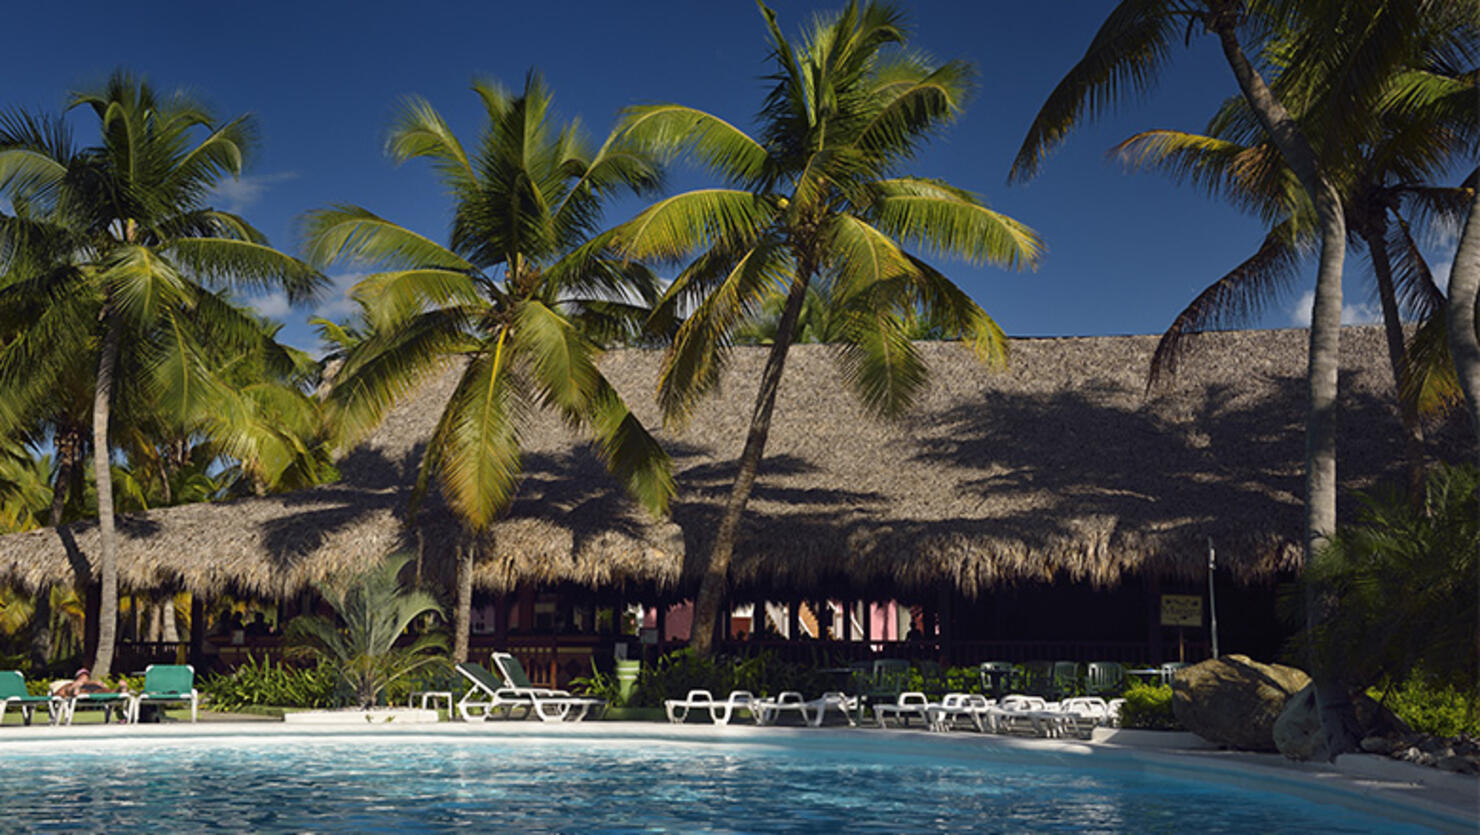 Pool and bar with coconut palm trees in Puerto Plata Dominican Republic